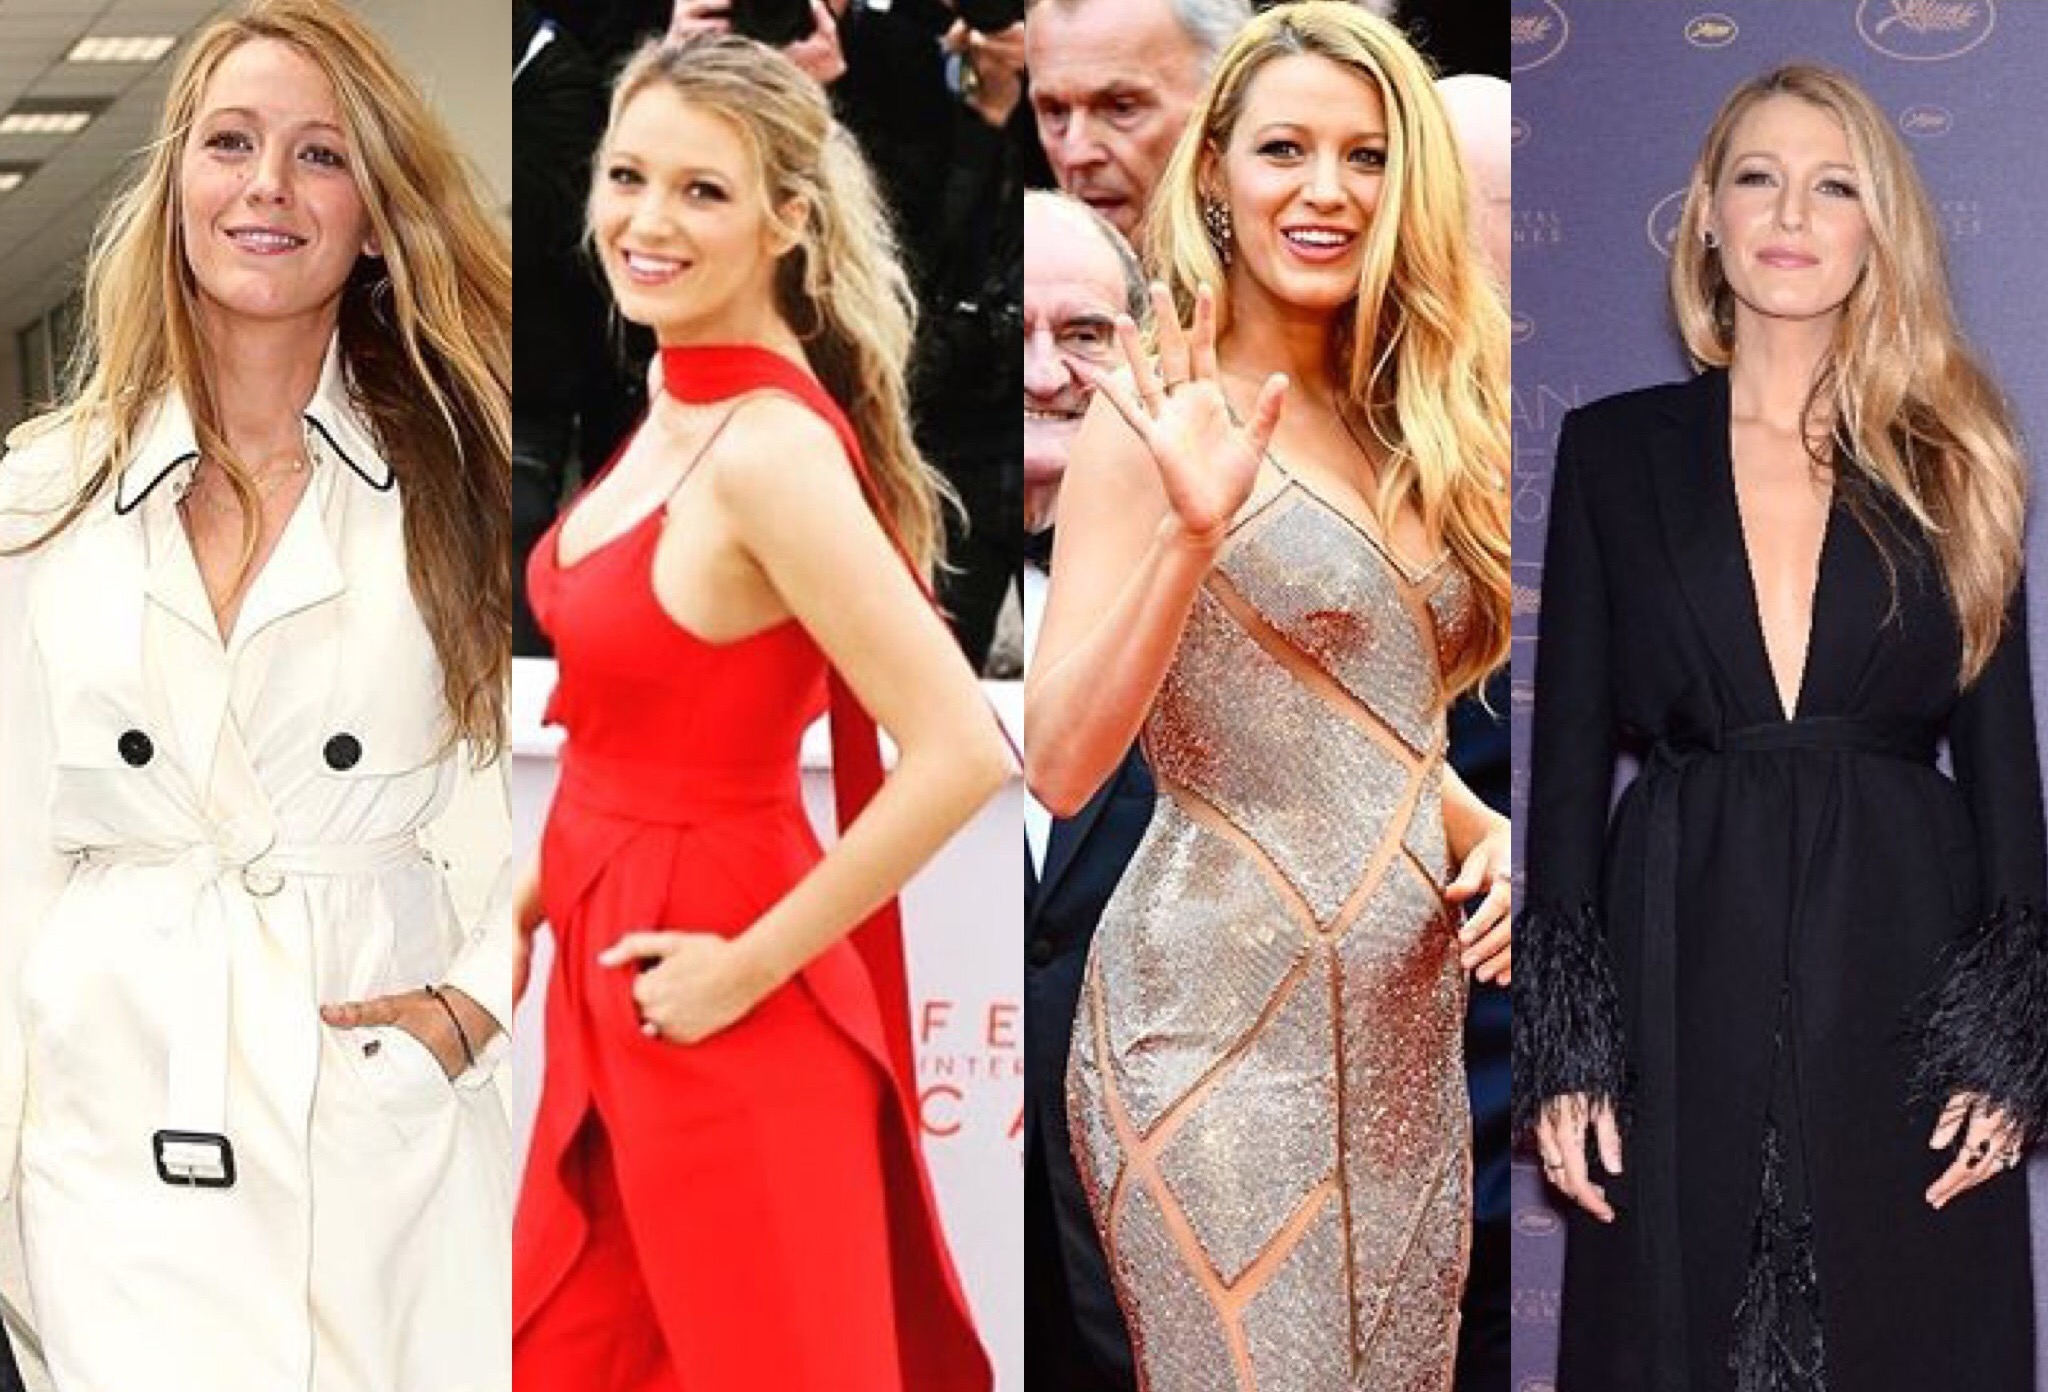 Blake Lively Wears Versace, Louboutin For Cannes Opening Ceremony